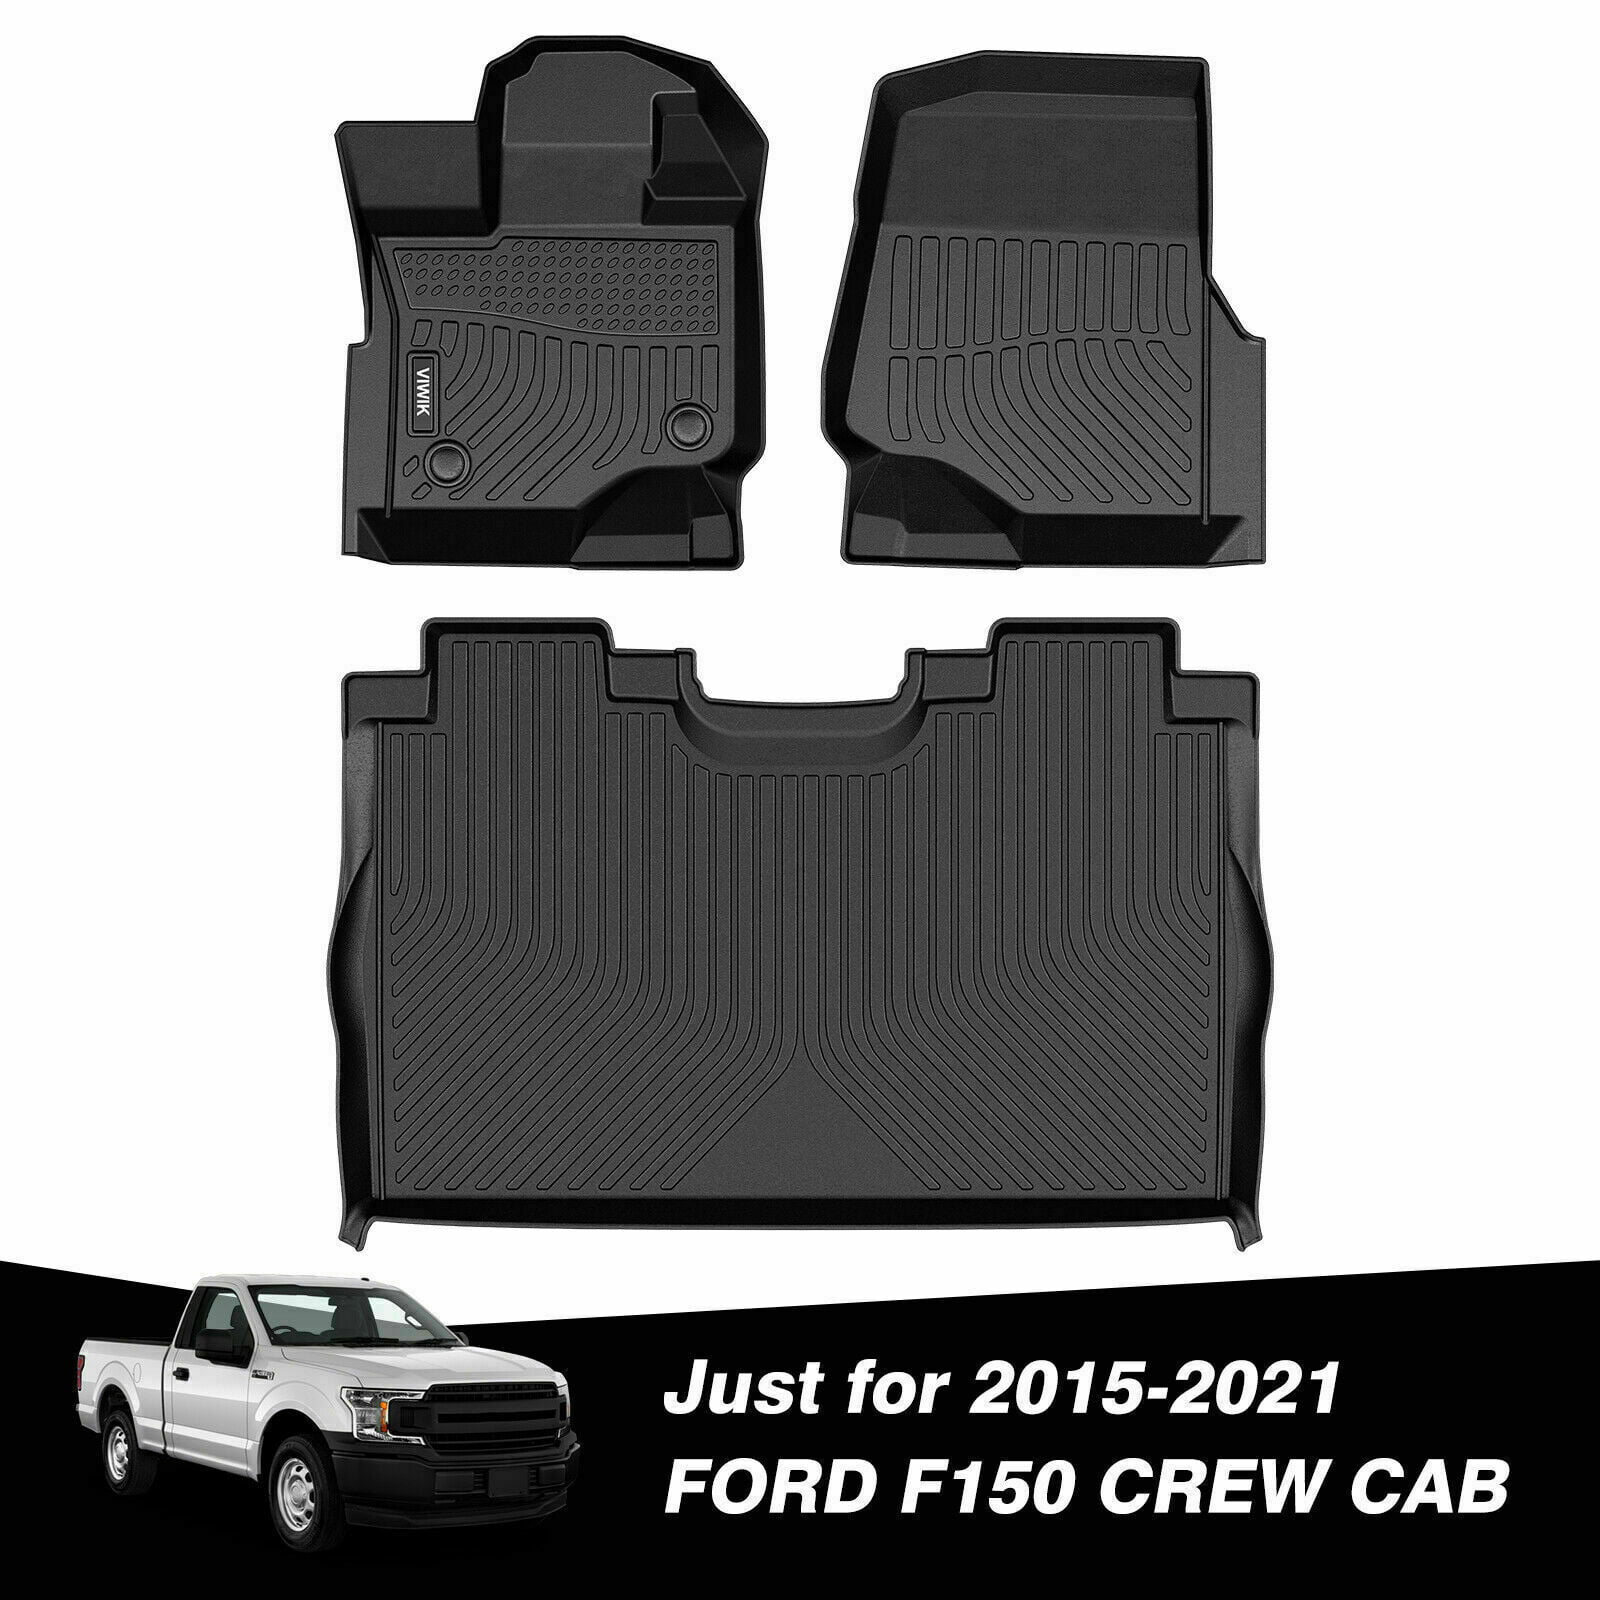 Husky Liners 16008 Black Fits 2015-2019 Ford F-150 5.8 Heavy Duty Bed Mat 